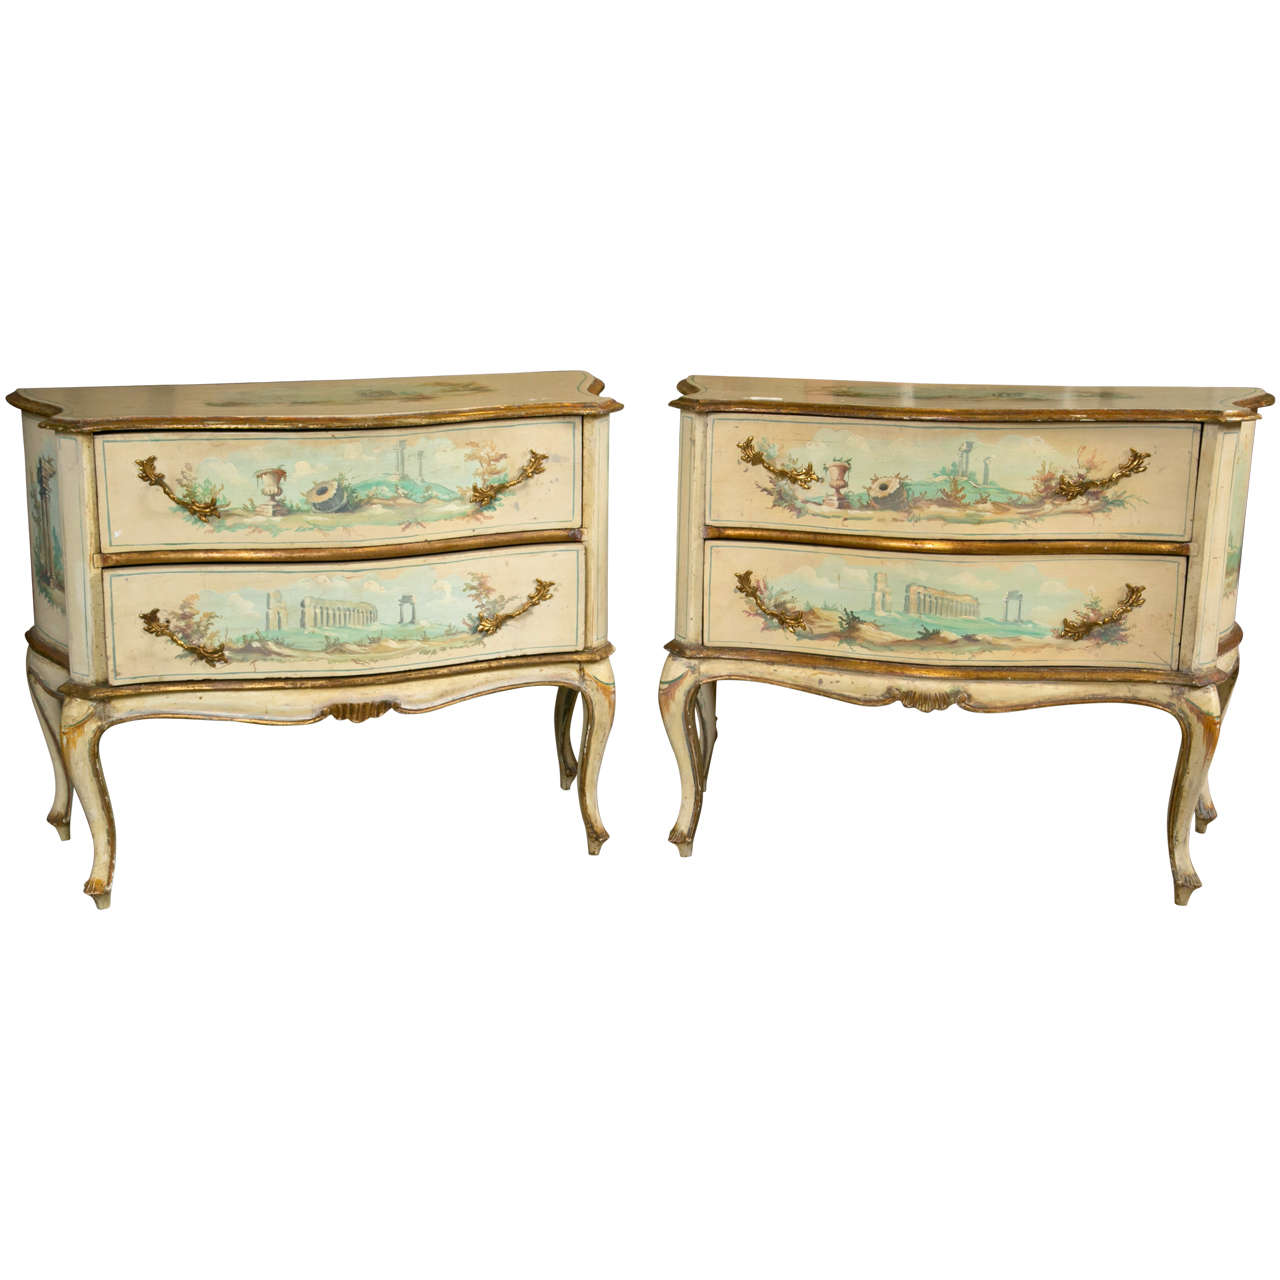 Pair o French Provincial Painted Stands